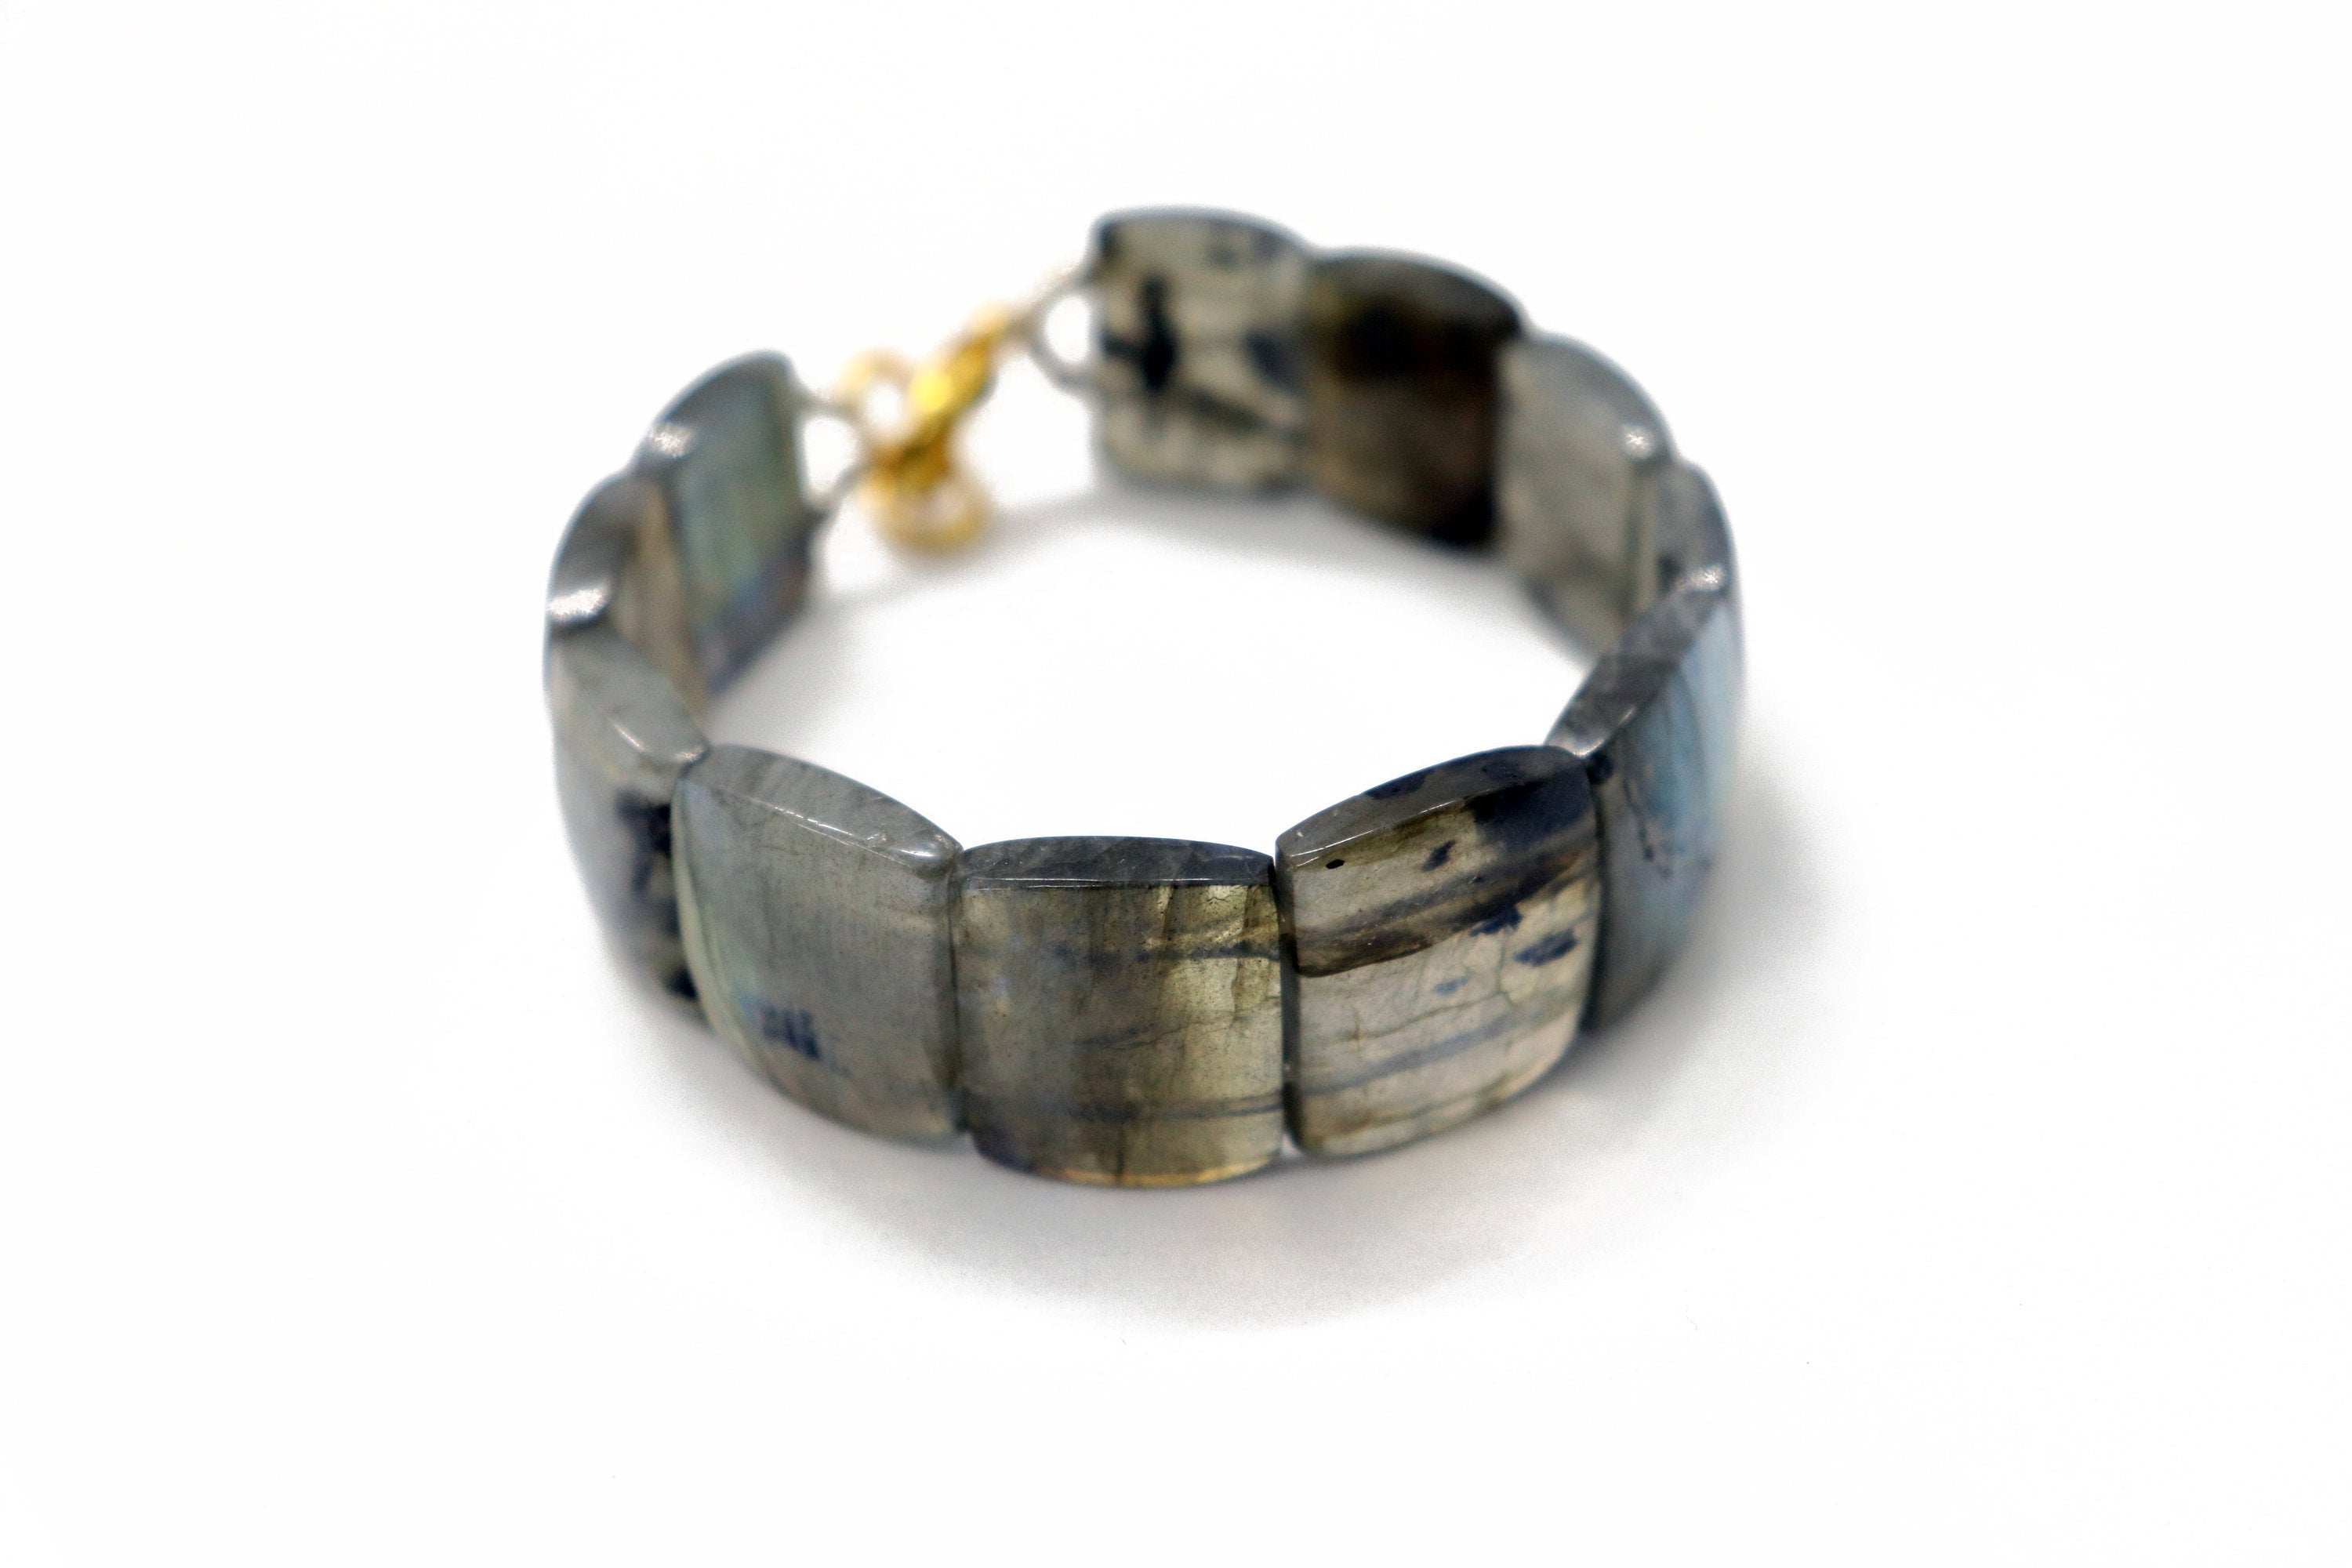 Labradorite gemstone Bracelet with Blue and Yellow Flash, Labradorite Bracelet, Gemstone bracelet gift for her, gift for him 6 inch Beadsforyourjewelry